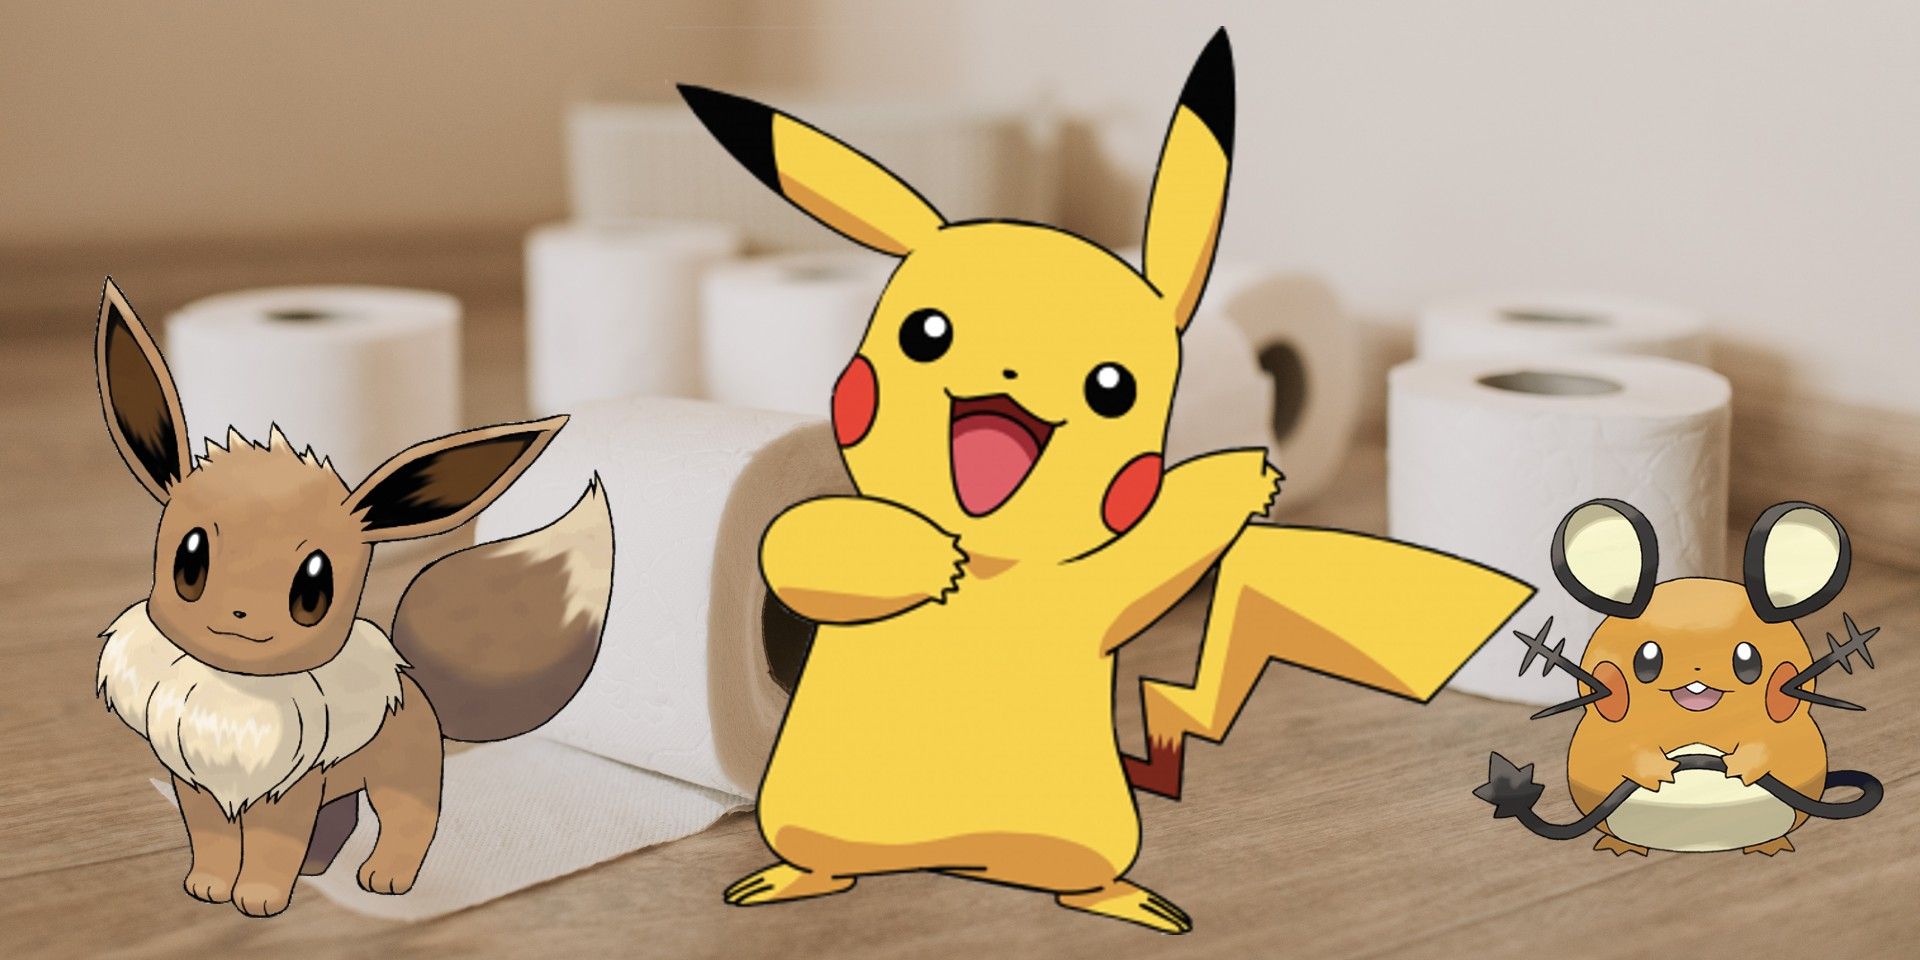 Eevee, Pikachu, and Dedenne Pokemon in front of several toilet paper rolls.